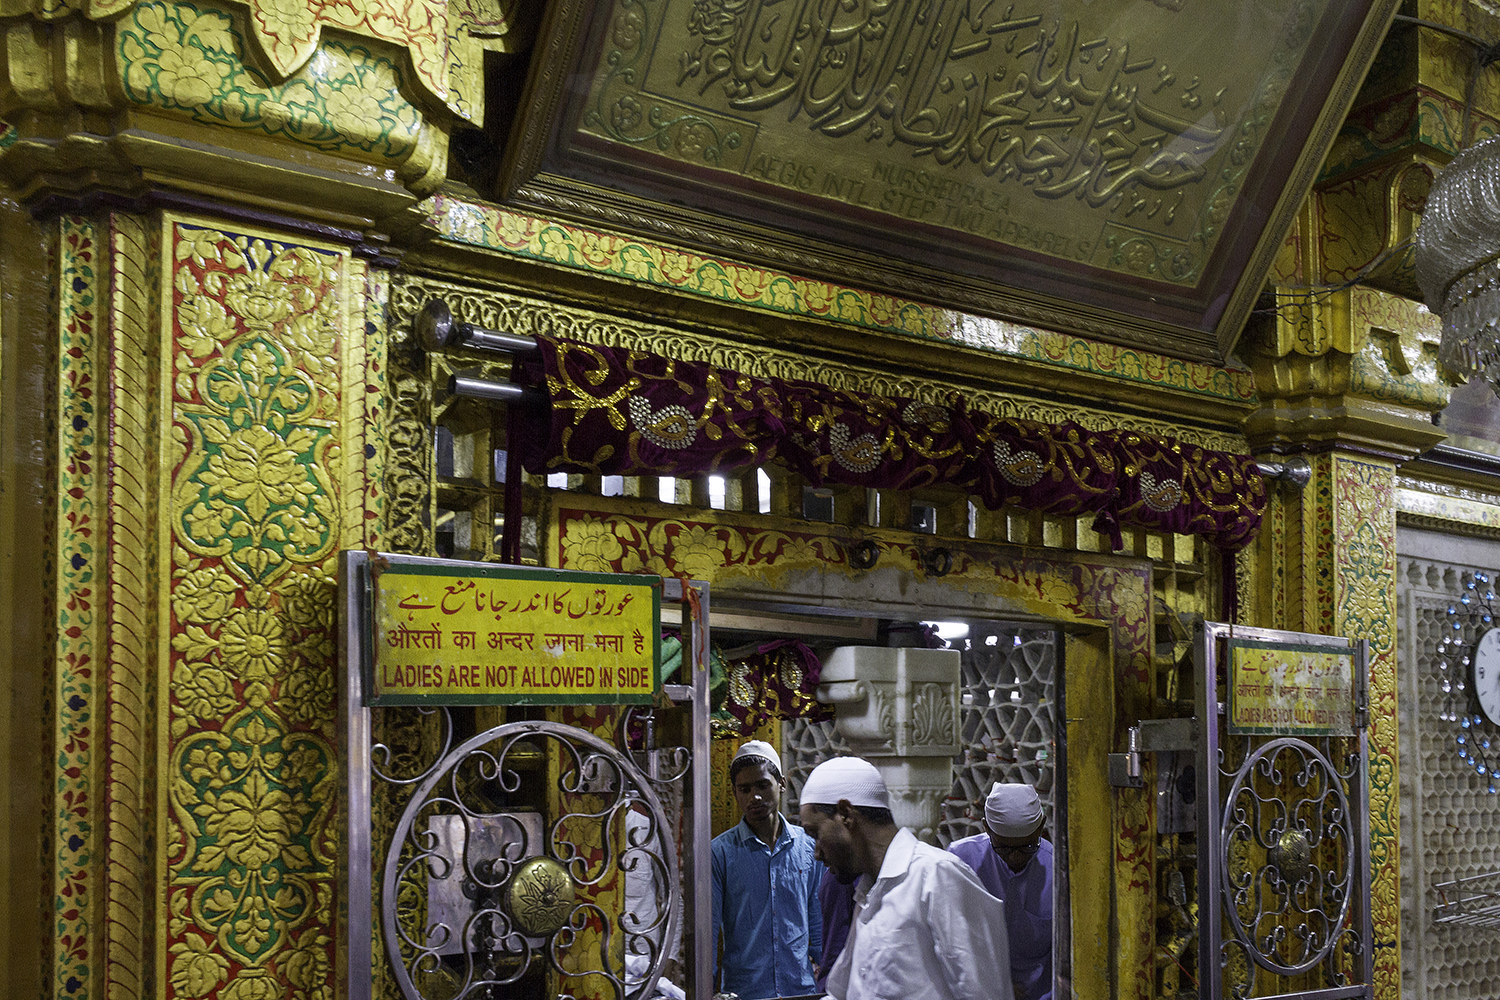 Why a PIL on women’s entry at the Nizamuddin dargah cannot be compared to Sabarimala 